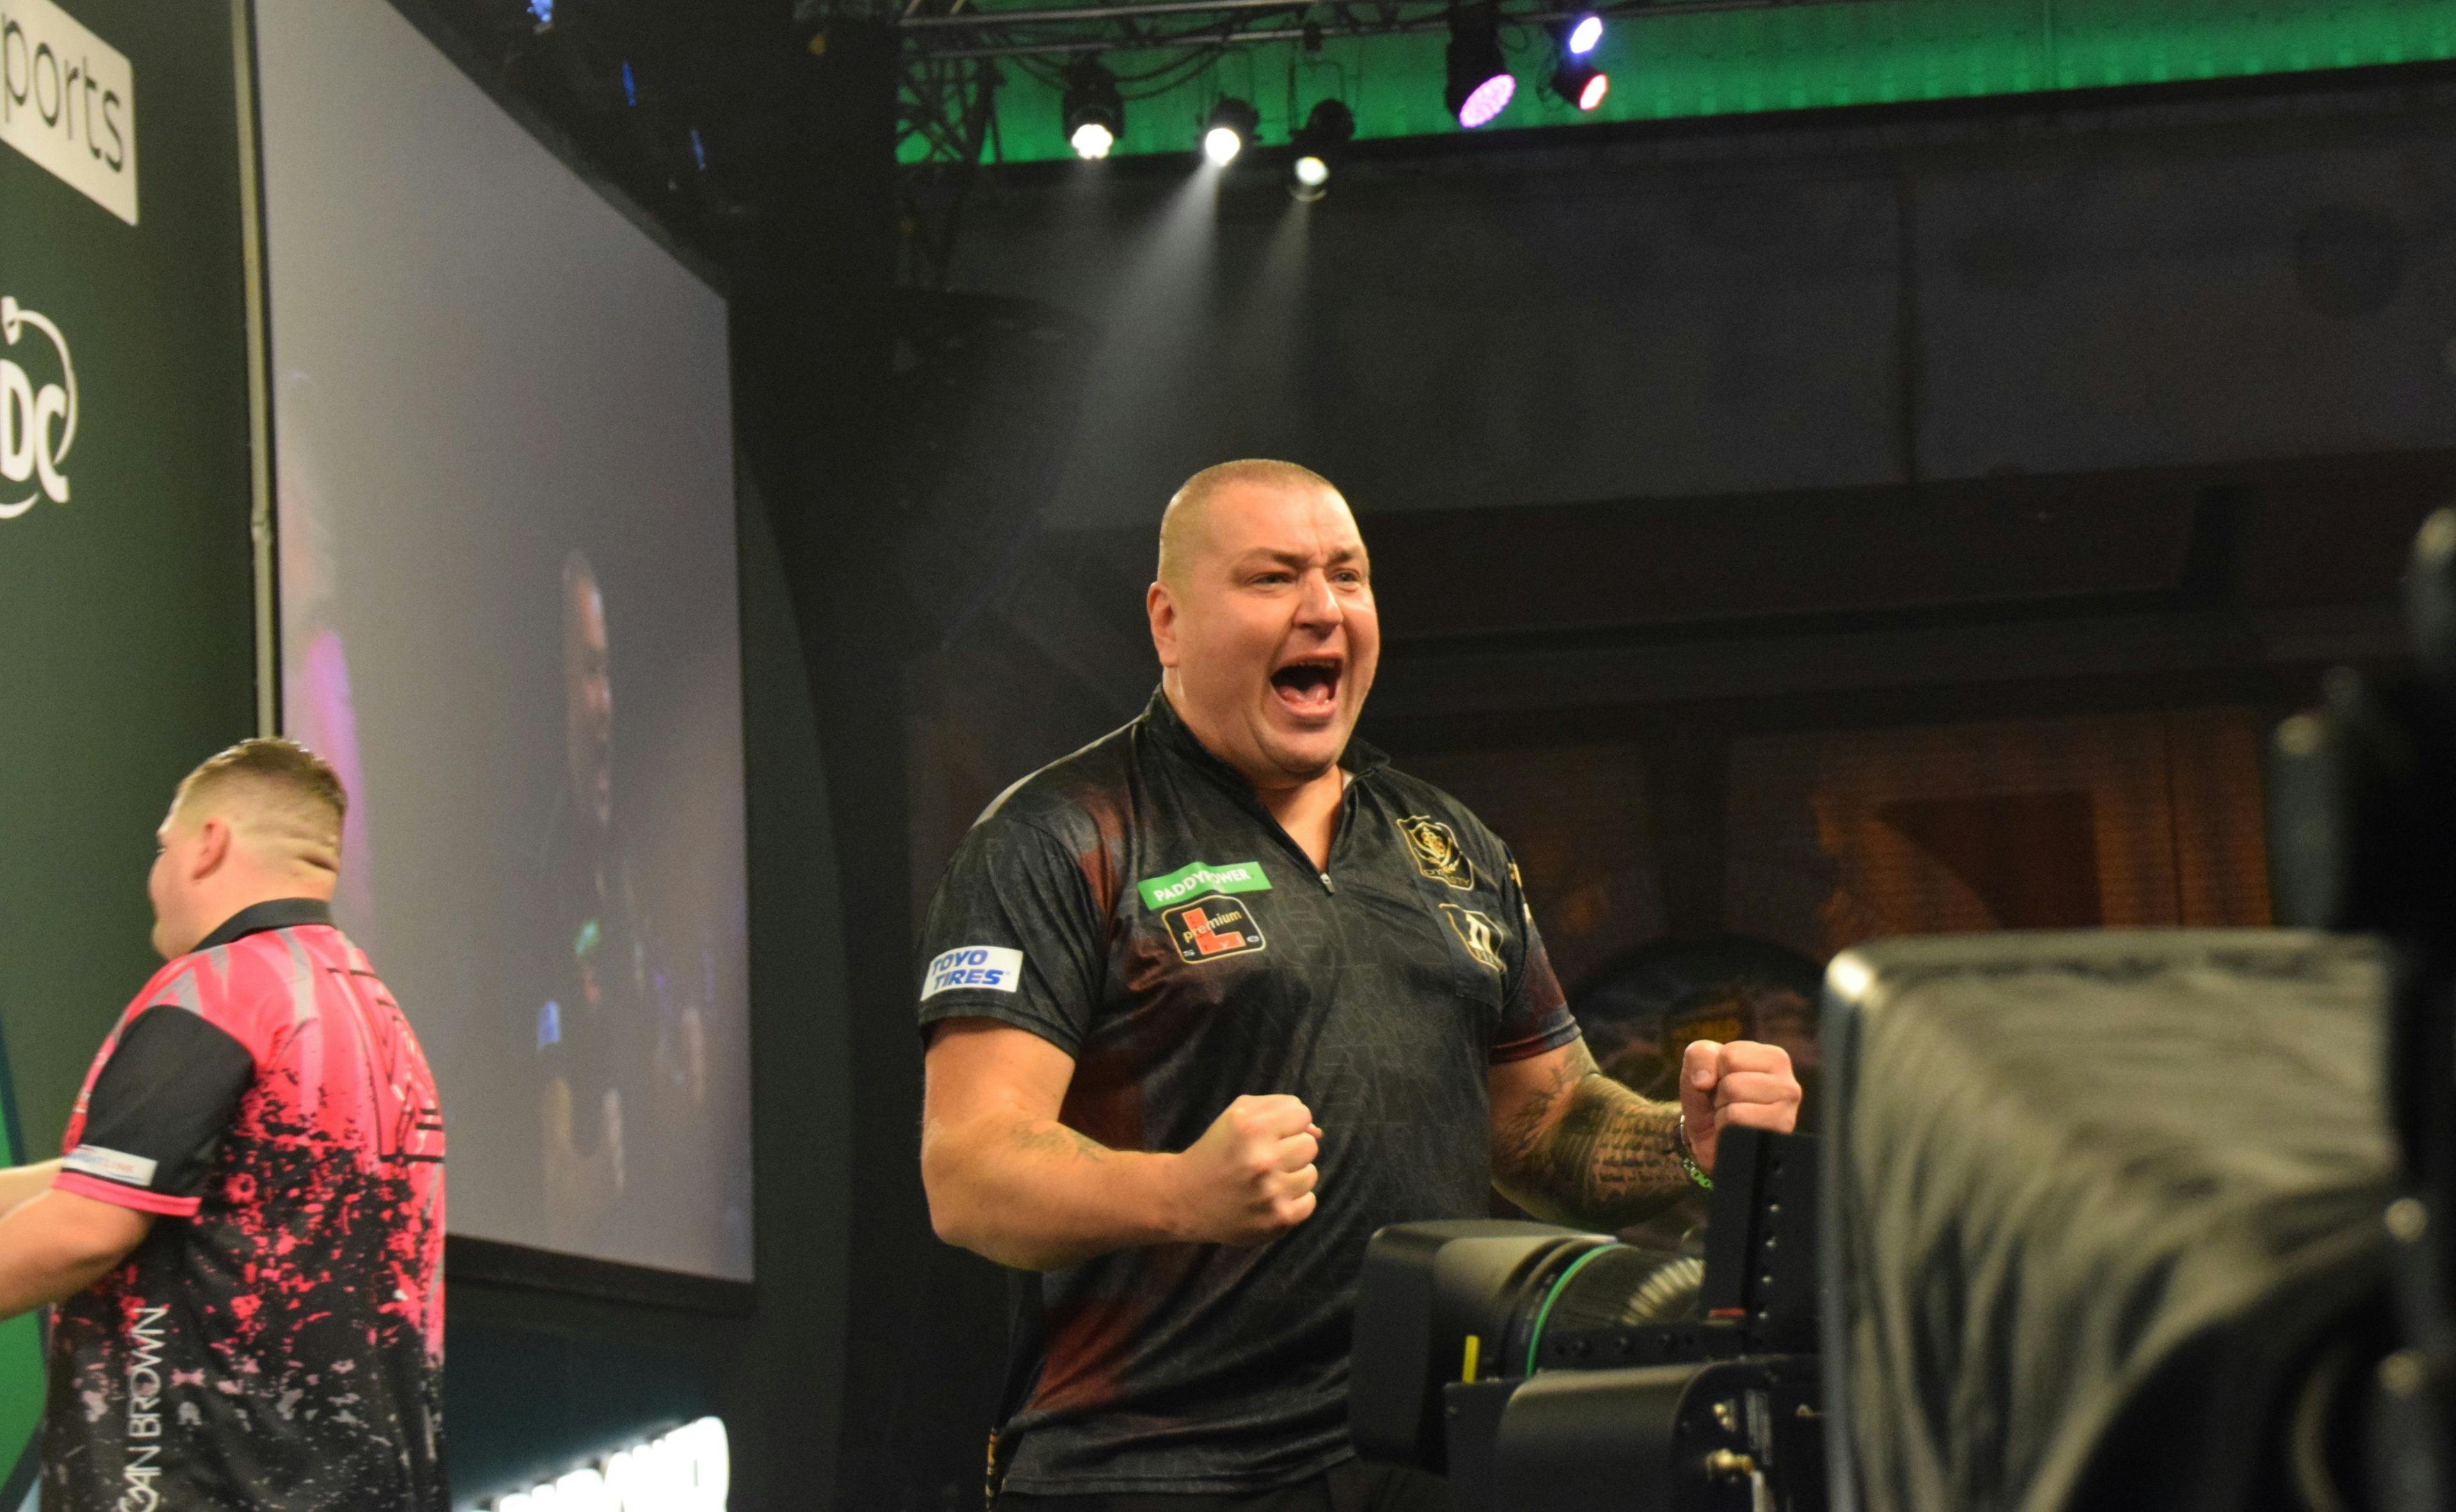 Eight-time soft tip World Champion sets his sights on PDC glory: Boris Krcmar post-match interview